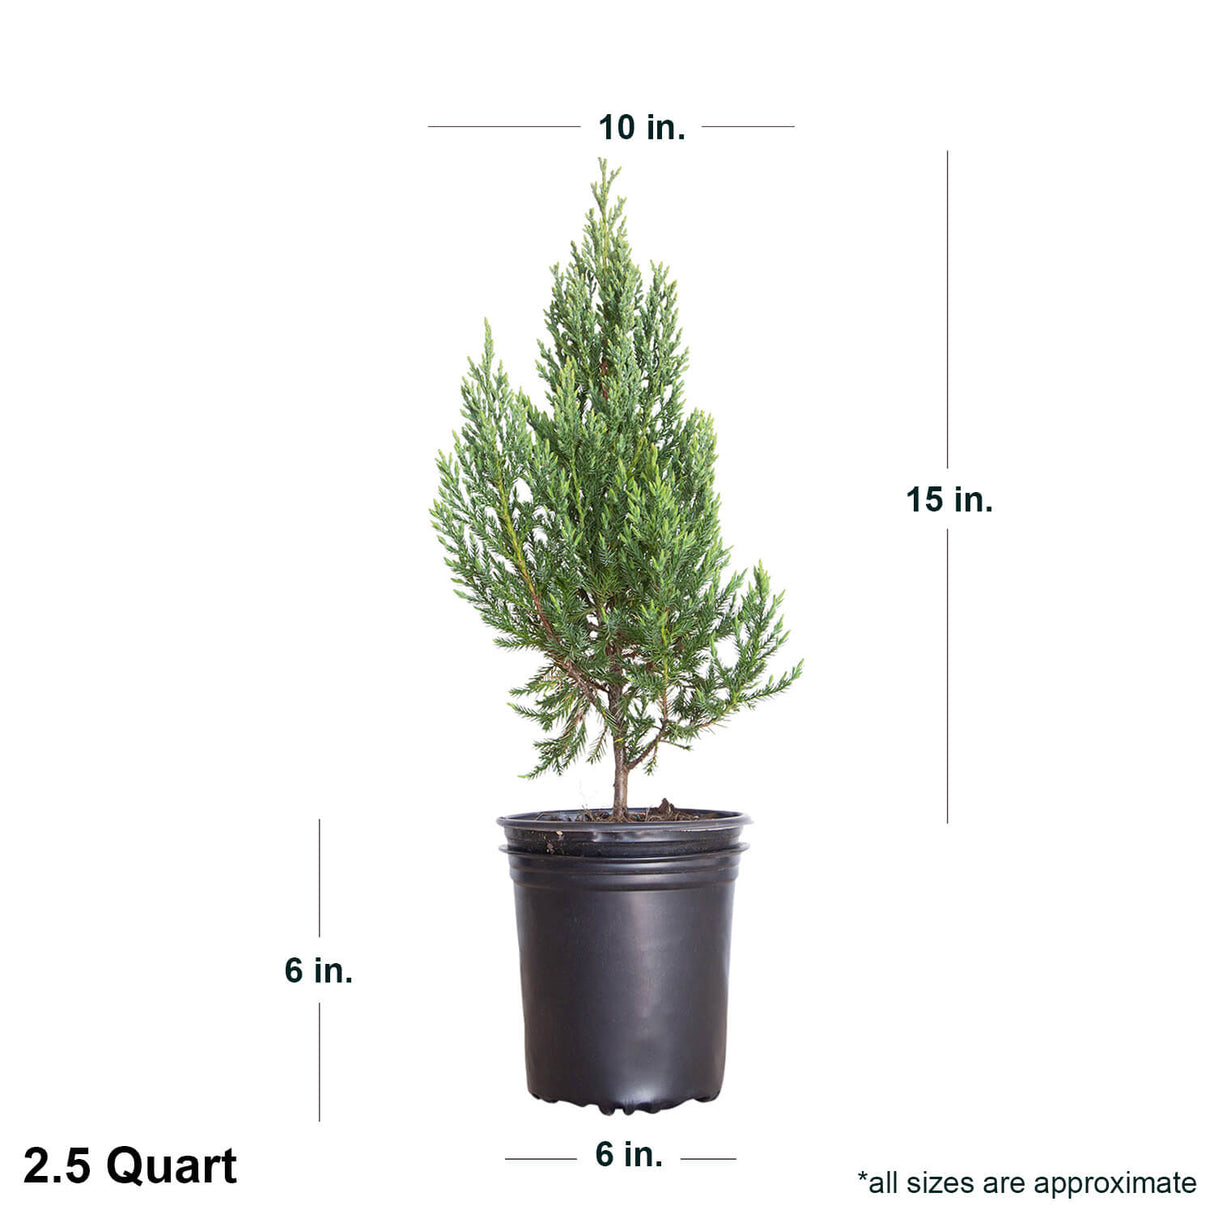 2.5 Qt. Blue Point Juniper Tree in pot with dimensions. Tree measures 15" when shipped